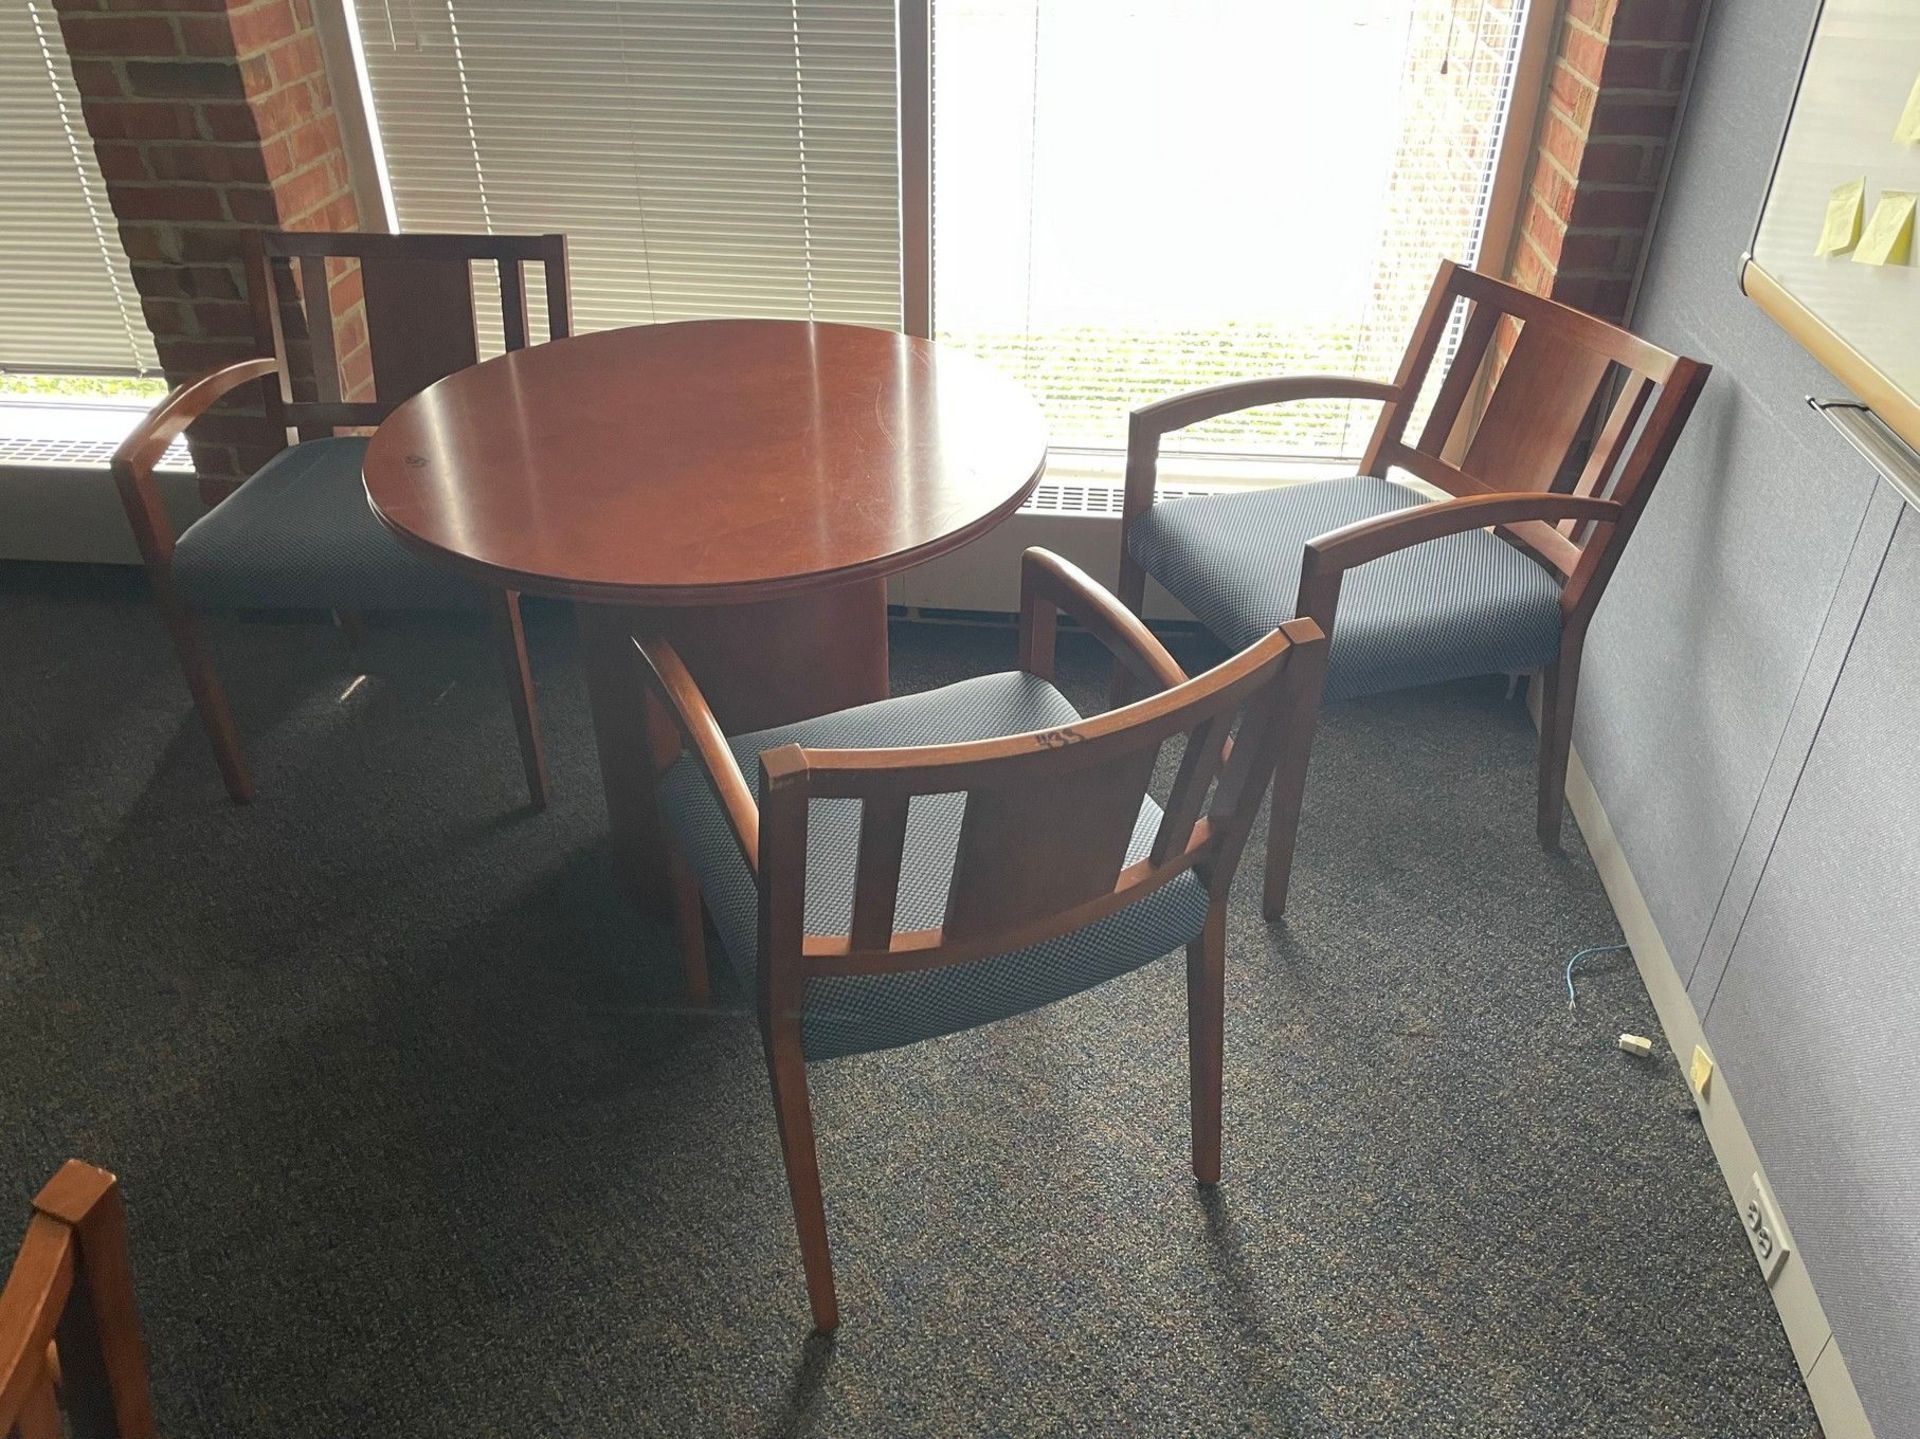 (LOT) EXECUTIVE OFFICE WITH U-SHAPED DESK, 3' DIAMETER TABLE, 2-DRAWER CABINET, (4) CHAIRS - Image 3 of 3